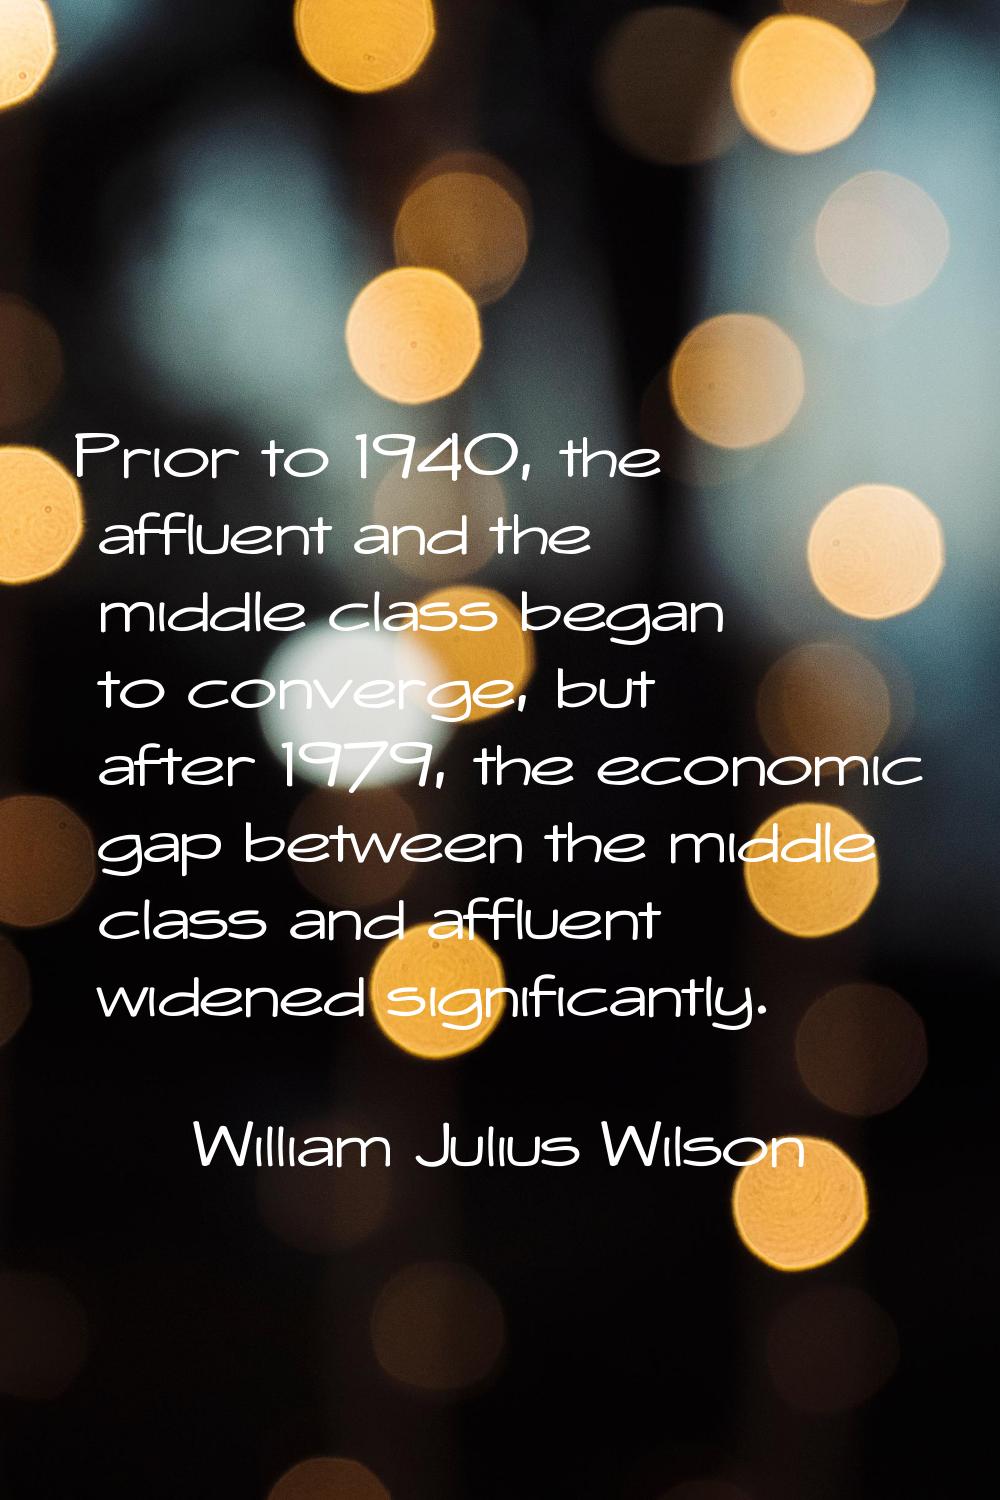 Prior to 1940, the affluent and the middle class began to converge, but after 1979, the economic ga